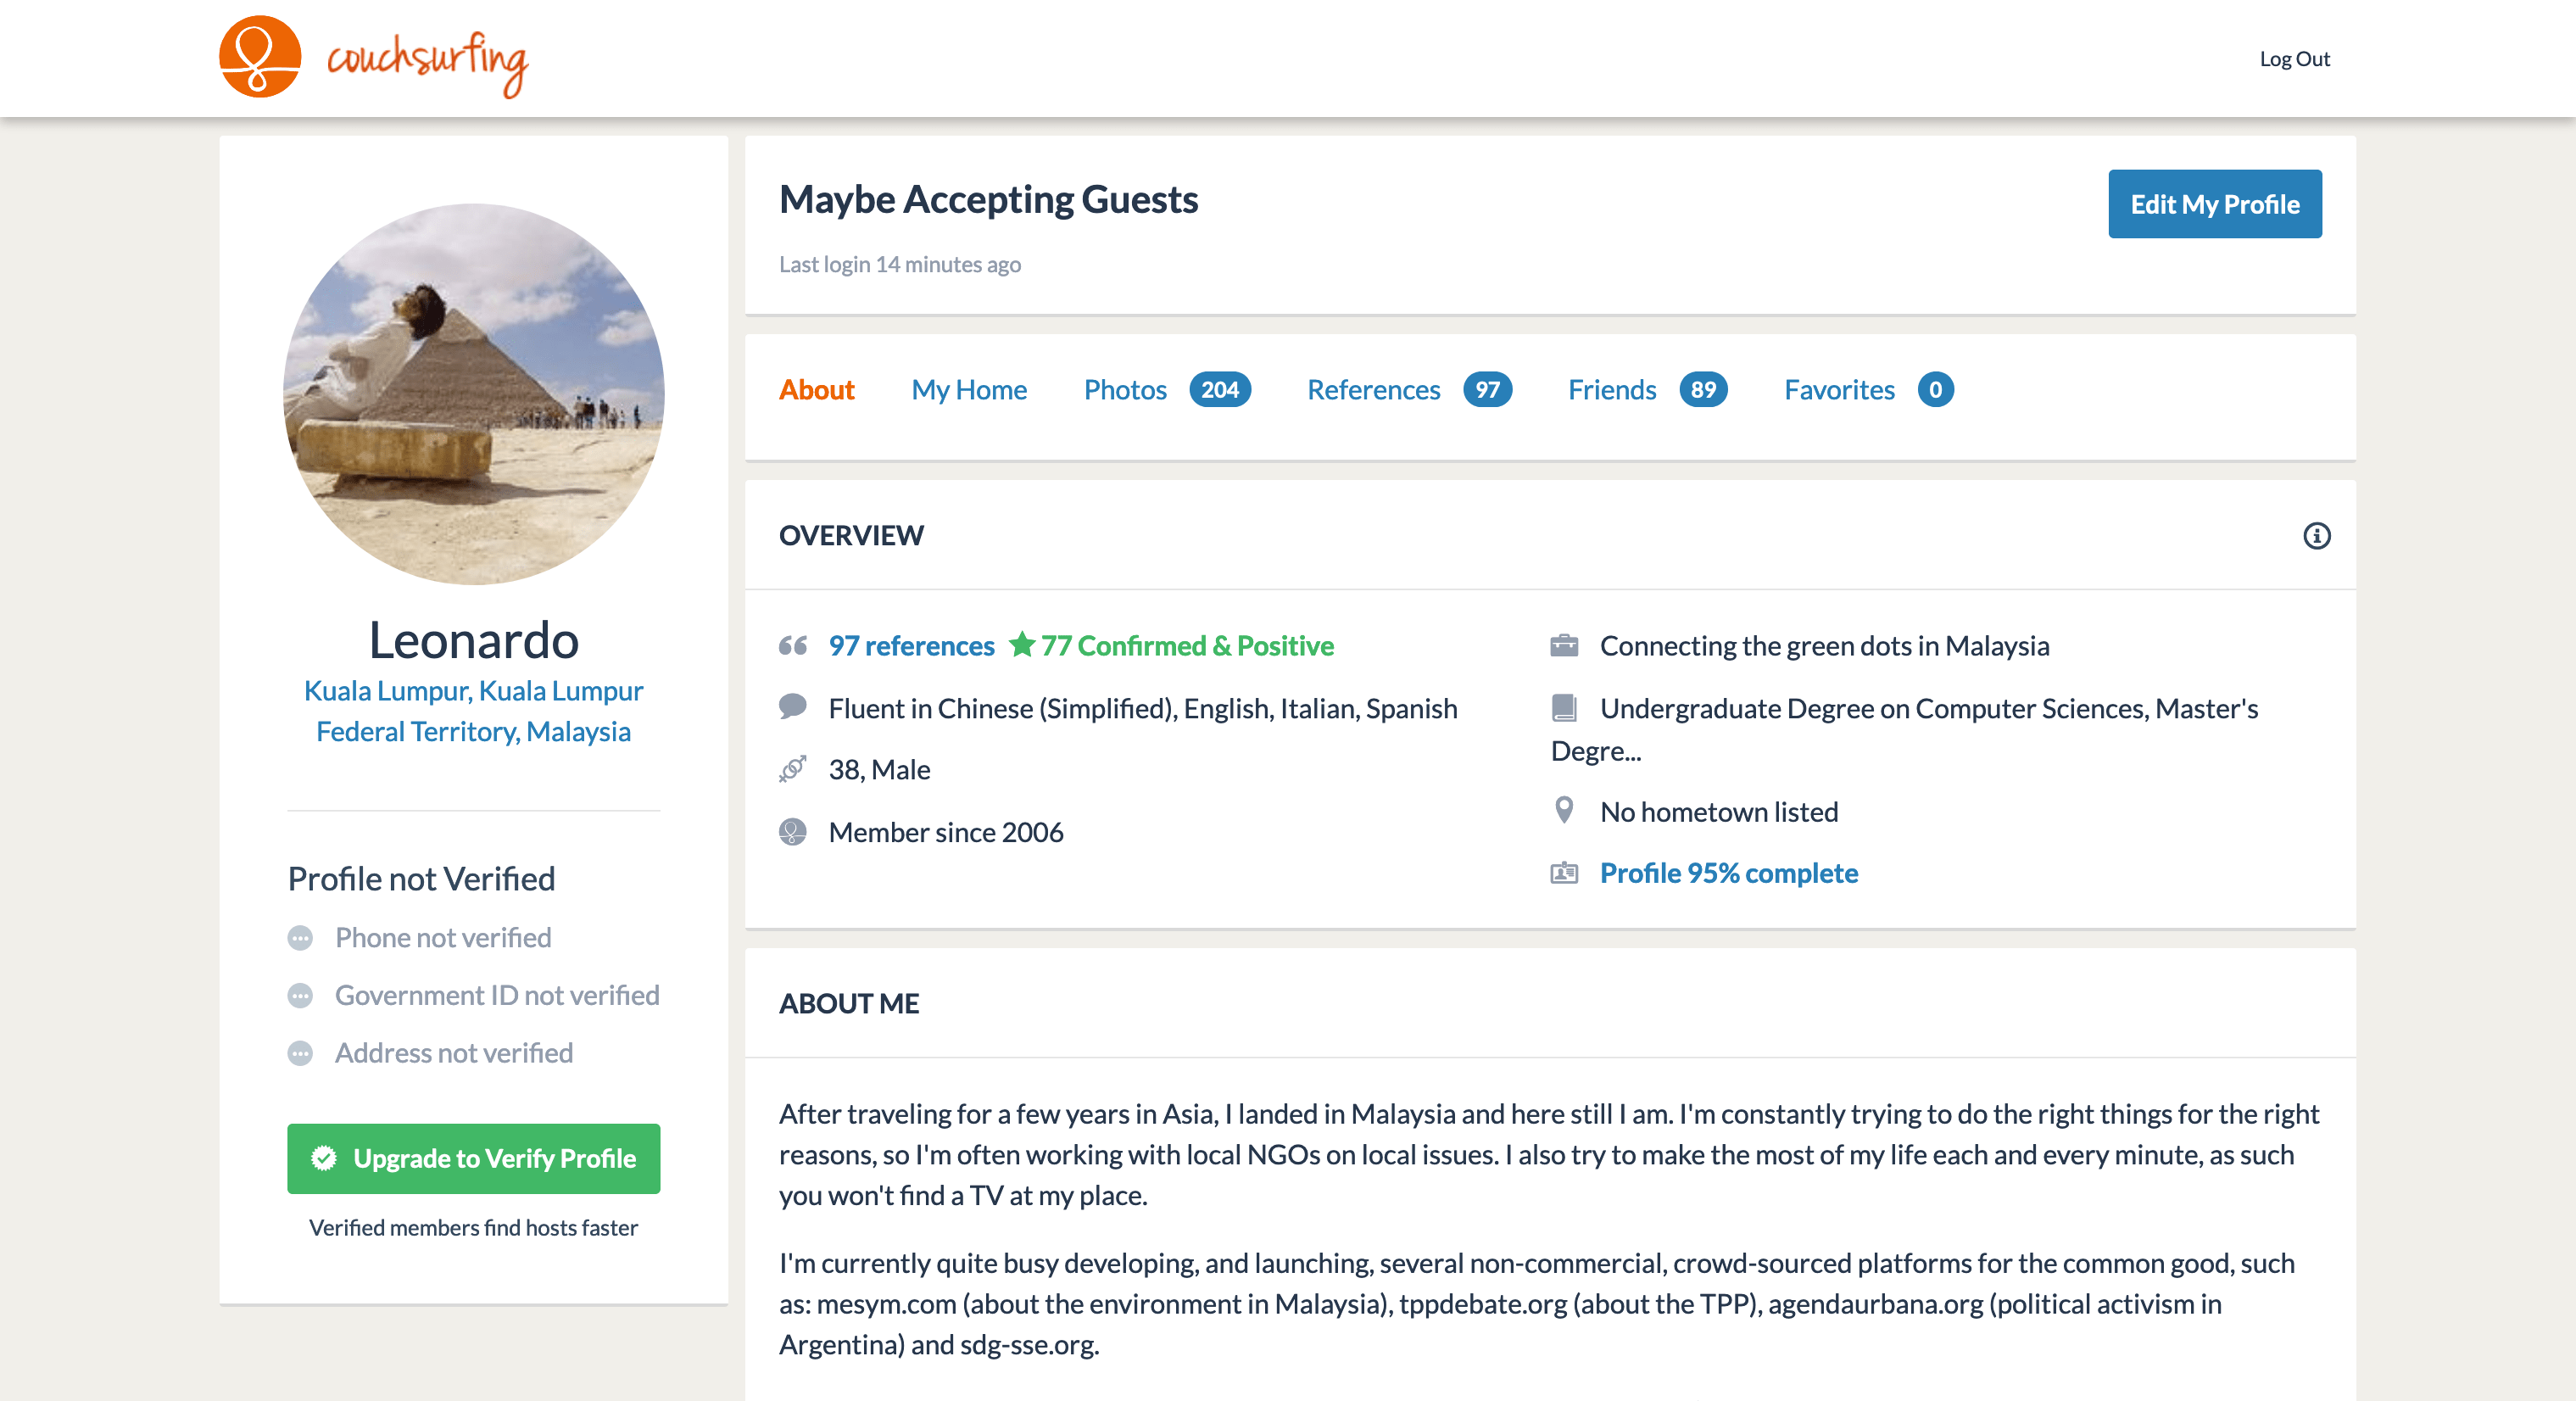 My profile on Couchsurfing